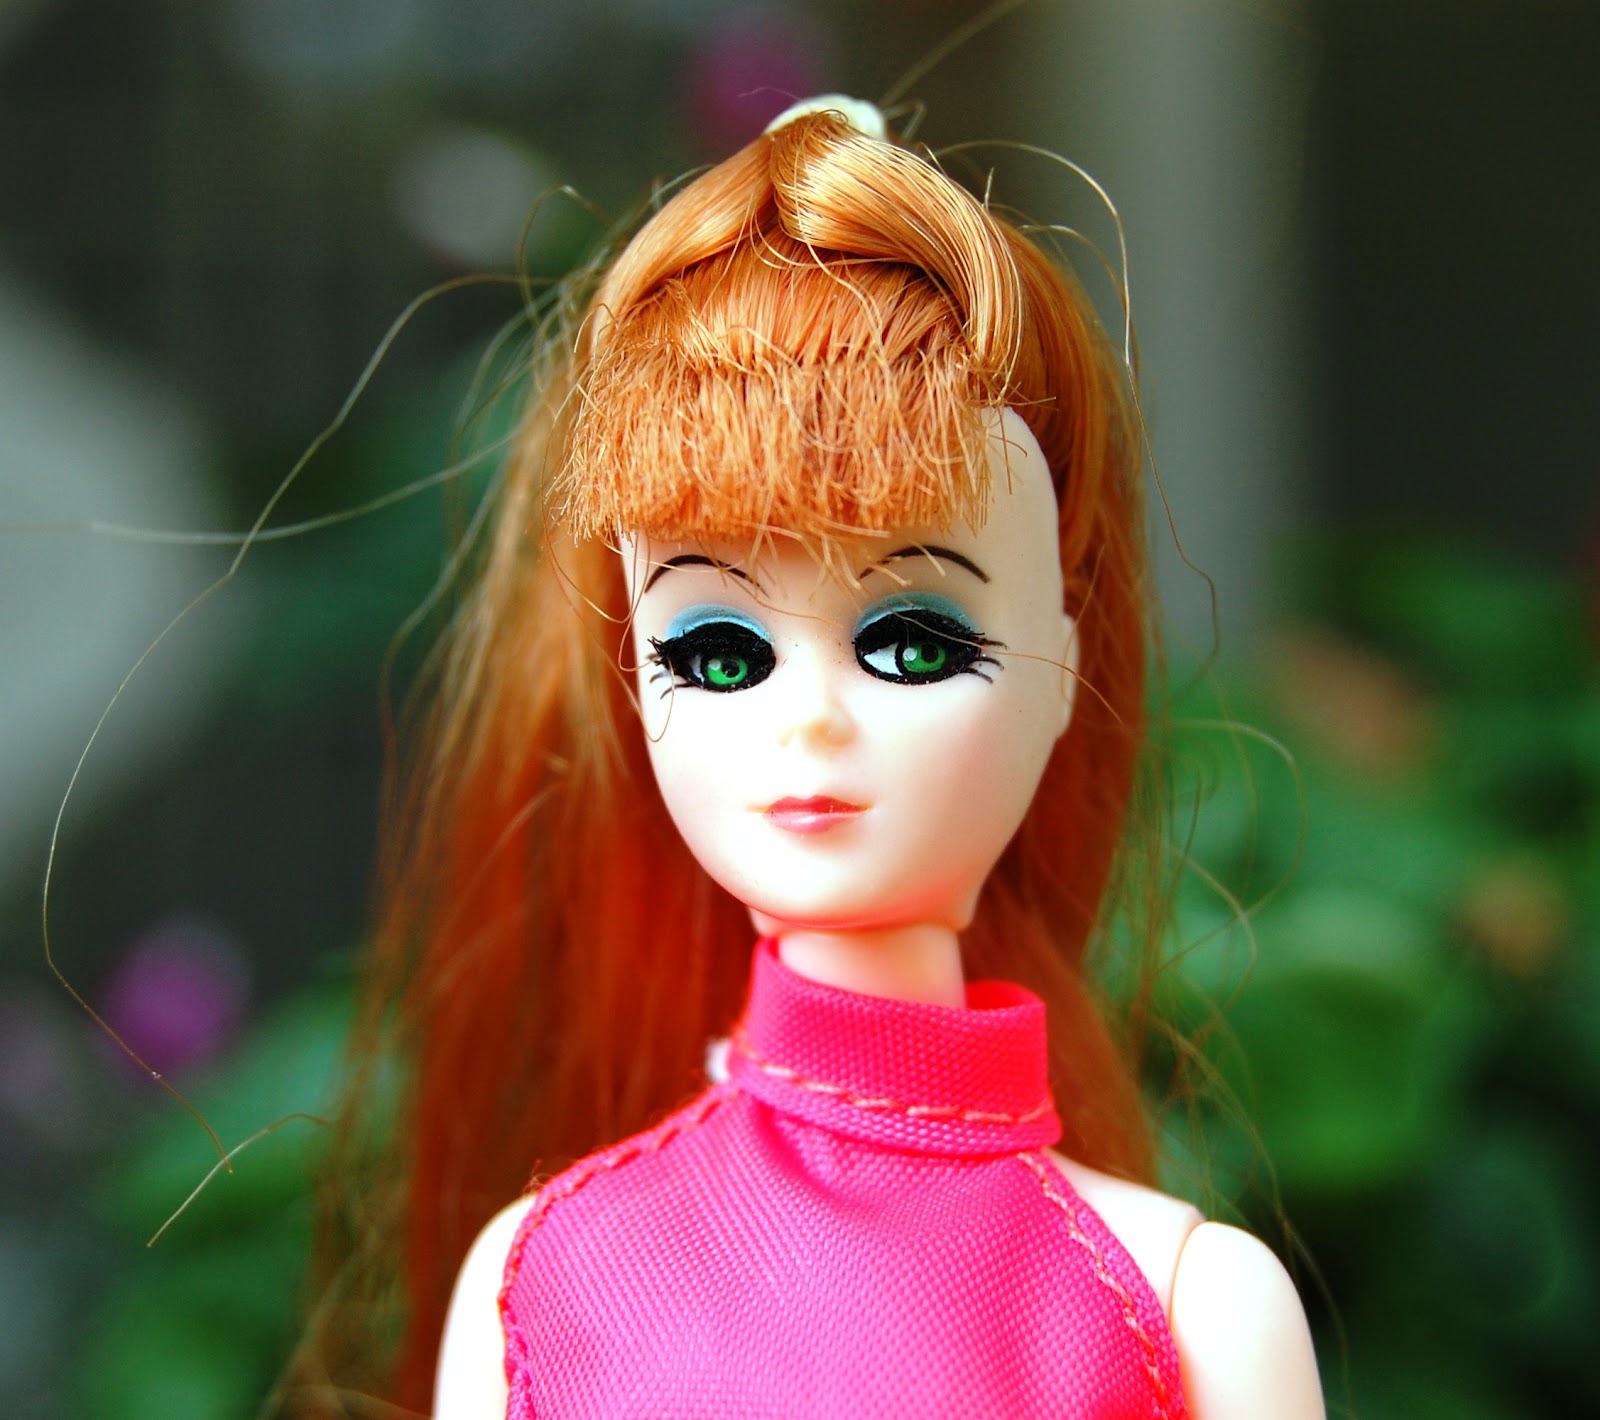 Glori the Topper Dawn Doll from the 1970s